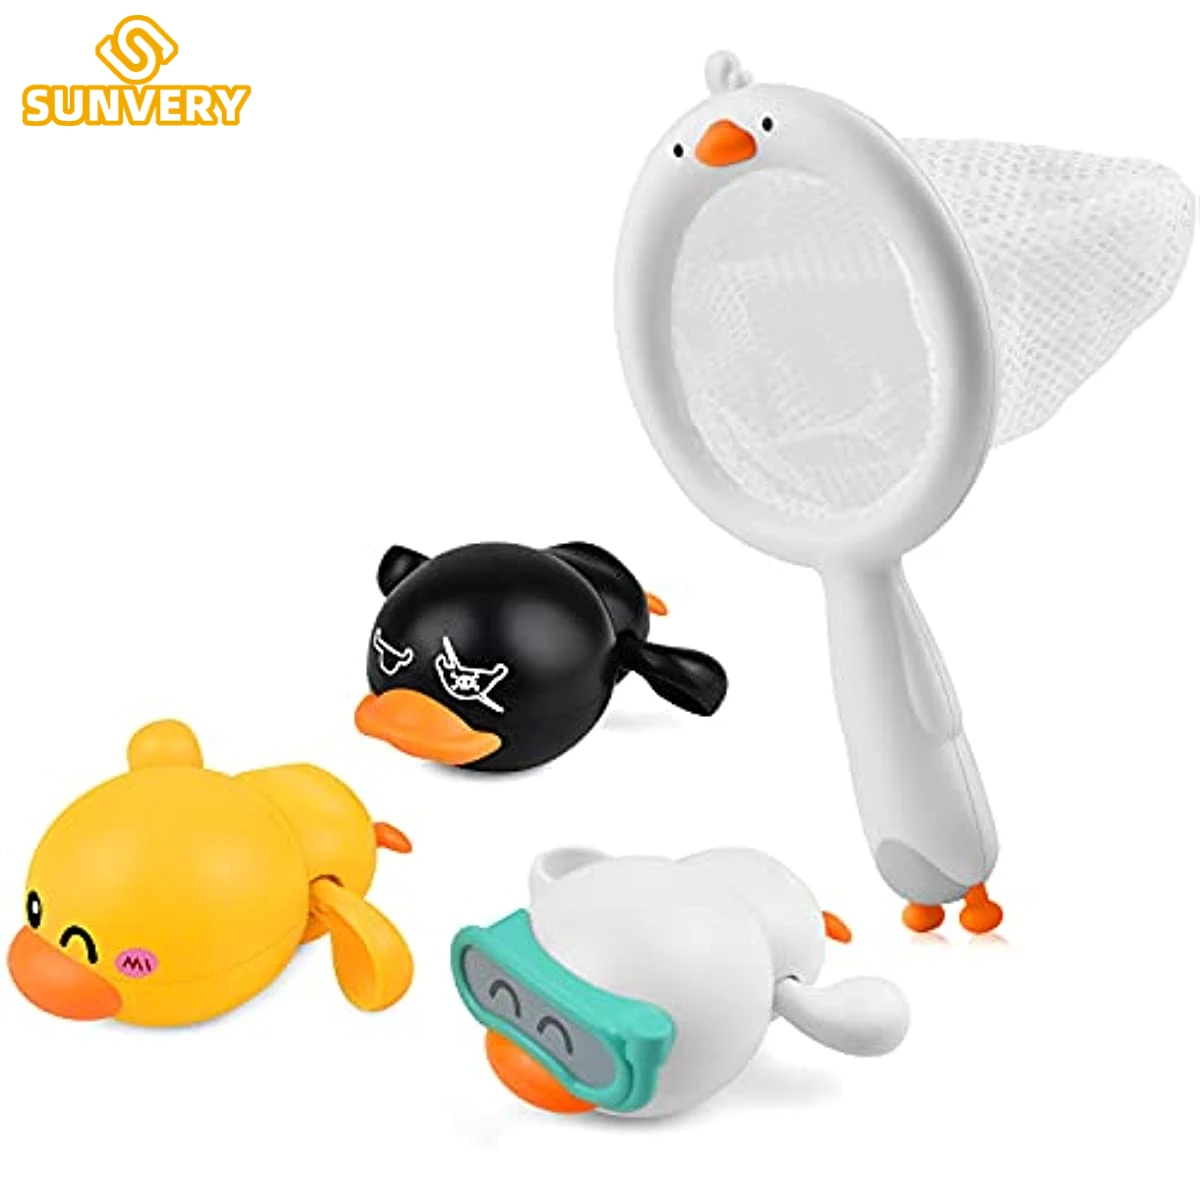 

Bathtub swimming duck Floating Wind-up Toys Pool Game Water Play ducks for Bathtub Shower Beach Infant Toddlers Kids Boys Girls